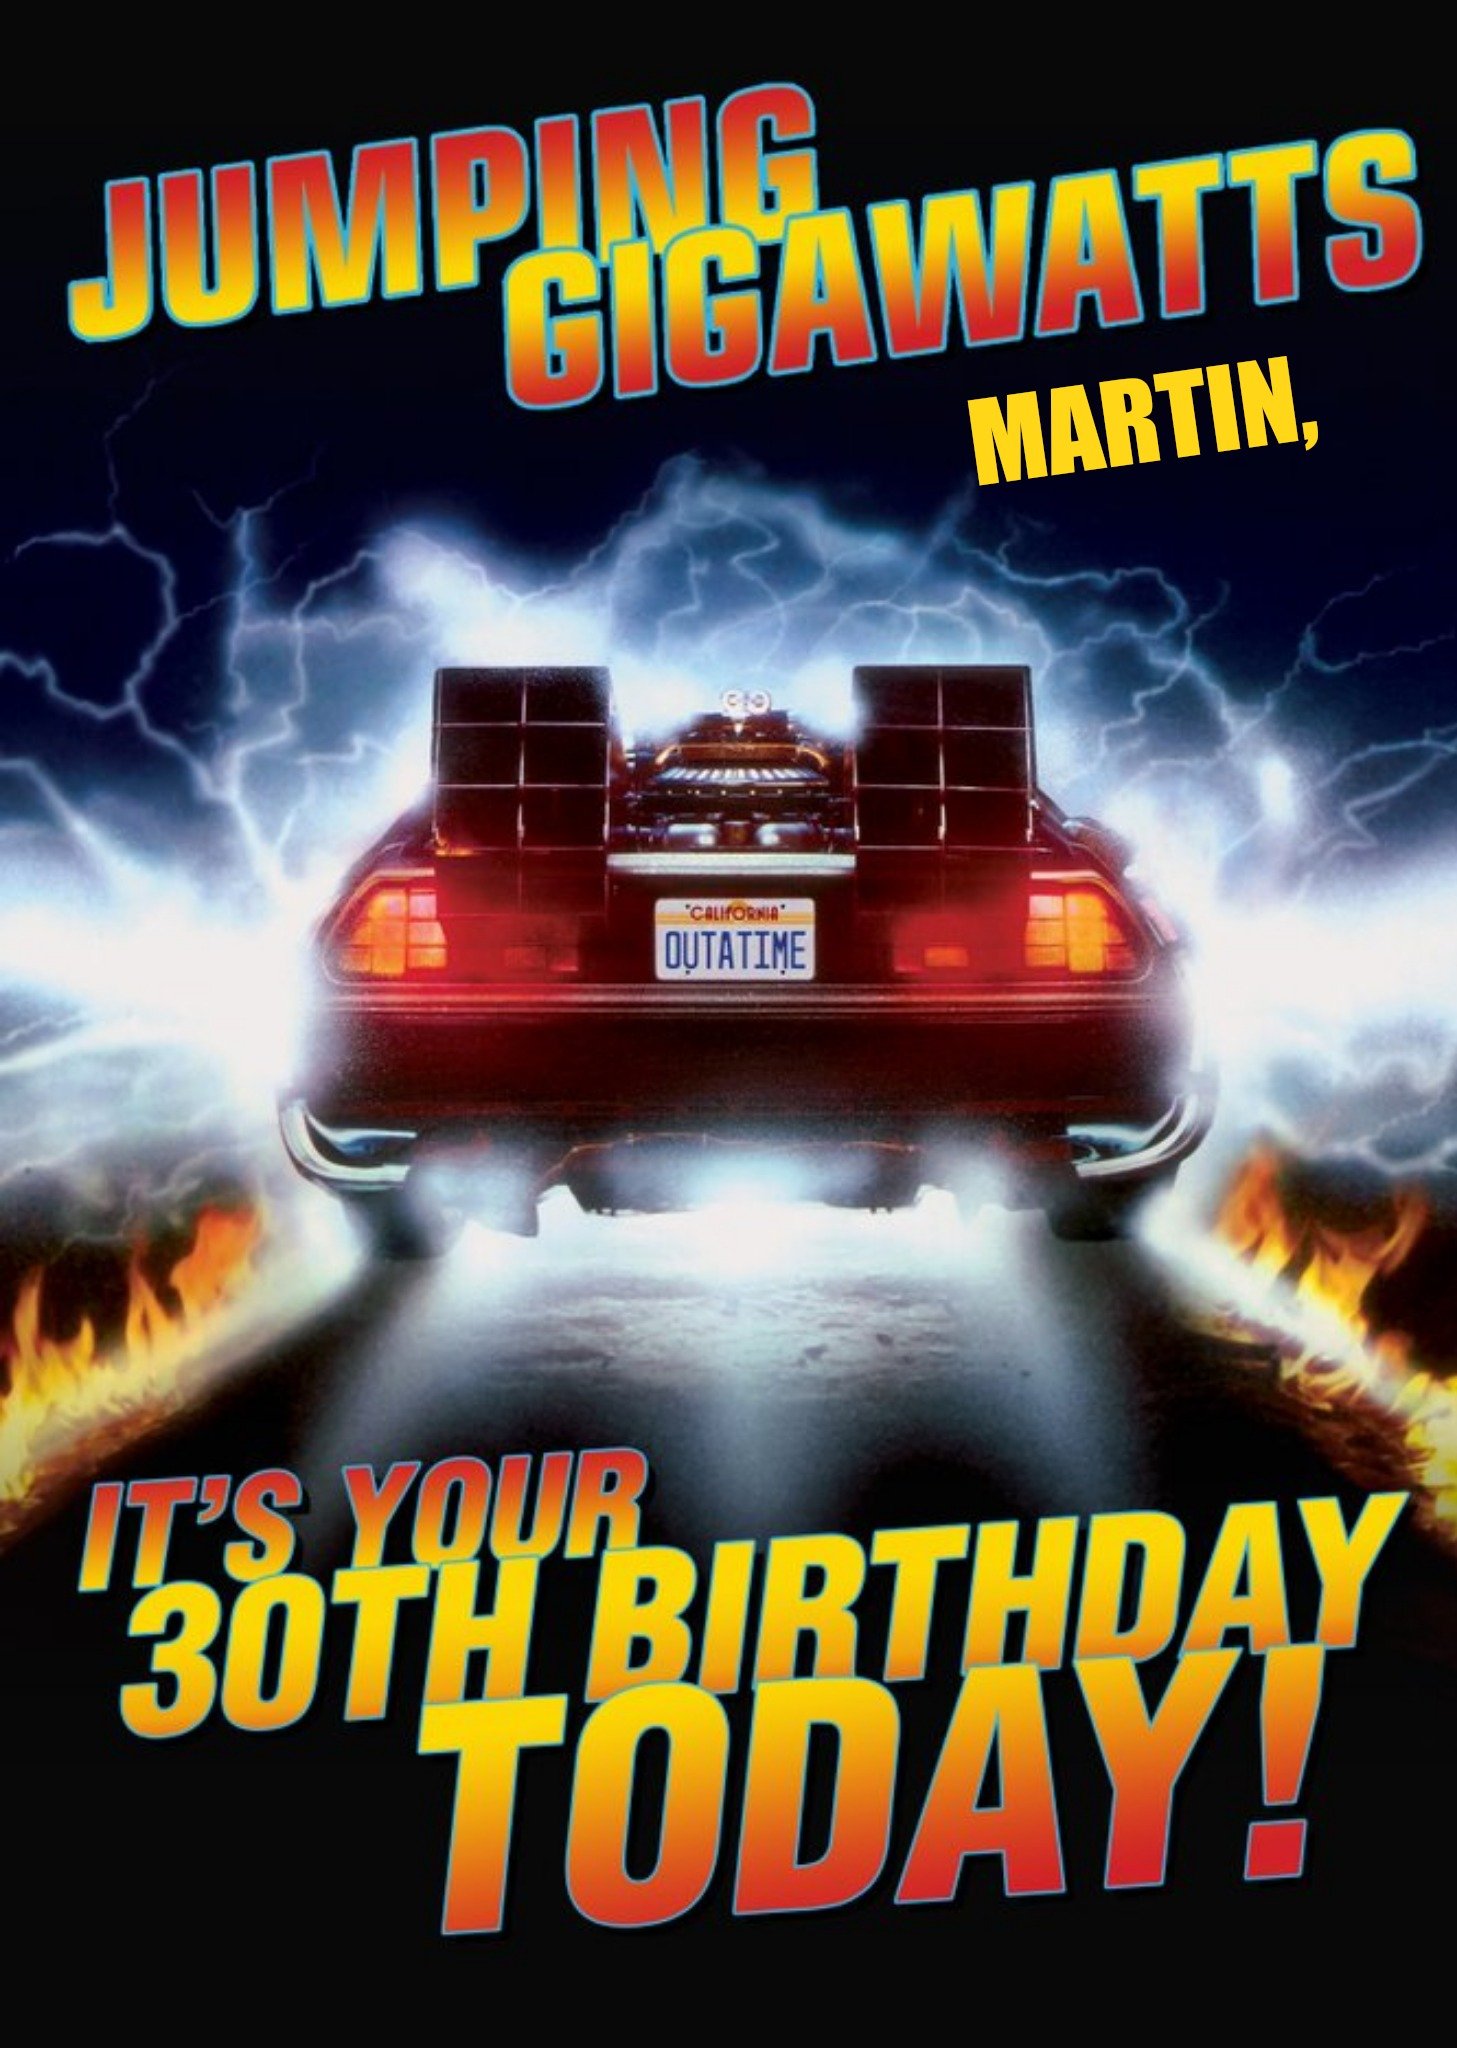 Moonpig Back To the Future Jumping Gigawatts Personalised 30th Birthday Card, Large